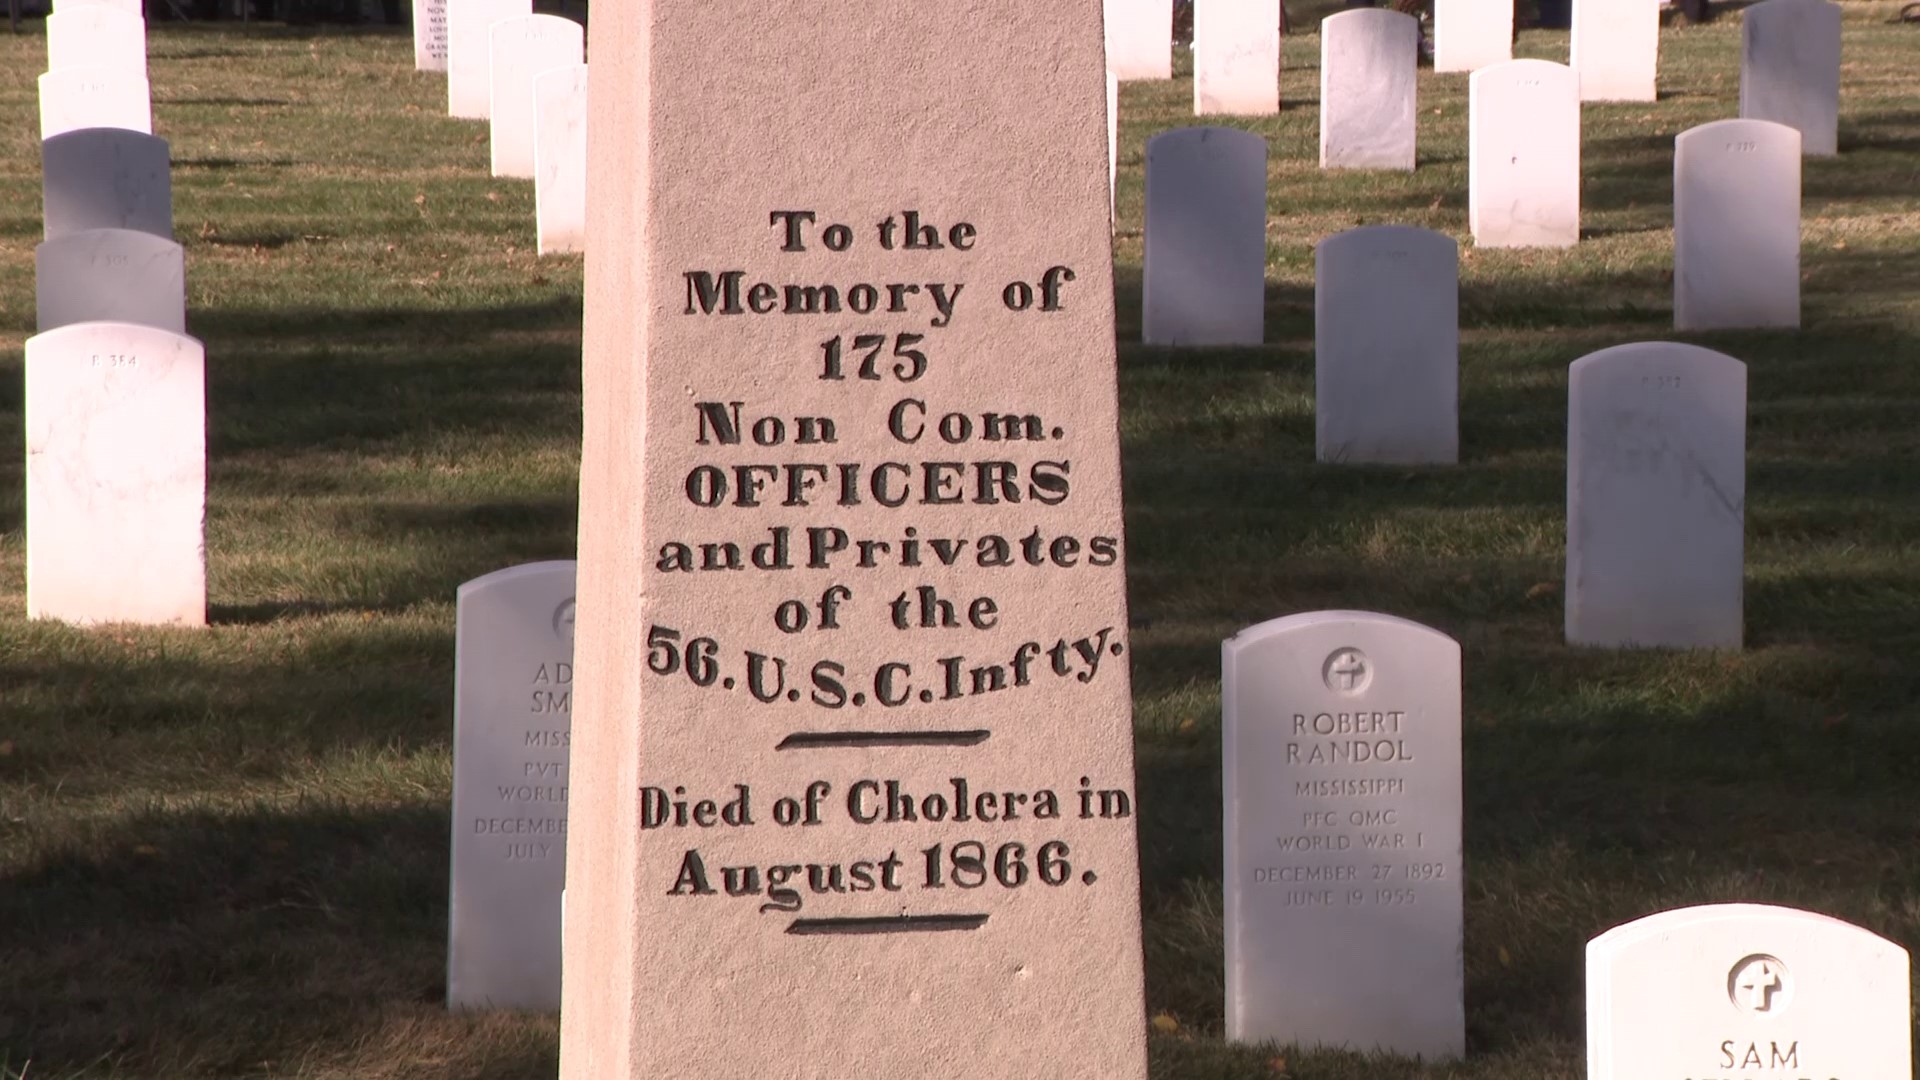 The 175 African American enlisted men of the 56th U.S. Colored Infantry are now buried together in a mass grave at Jefferson Barracks National Cemetery.